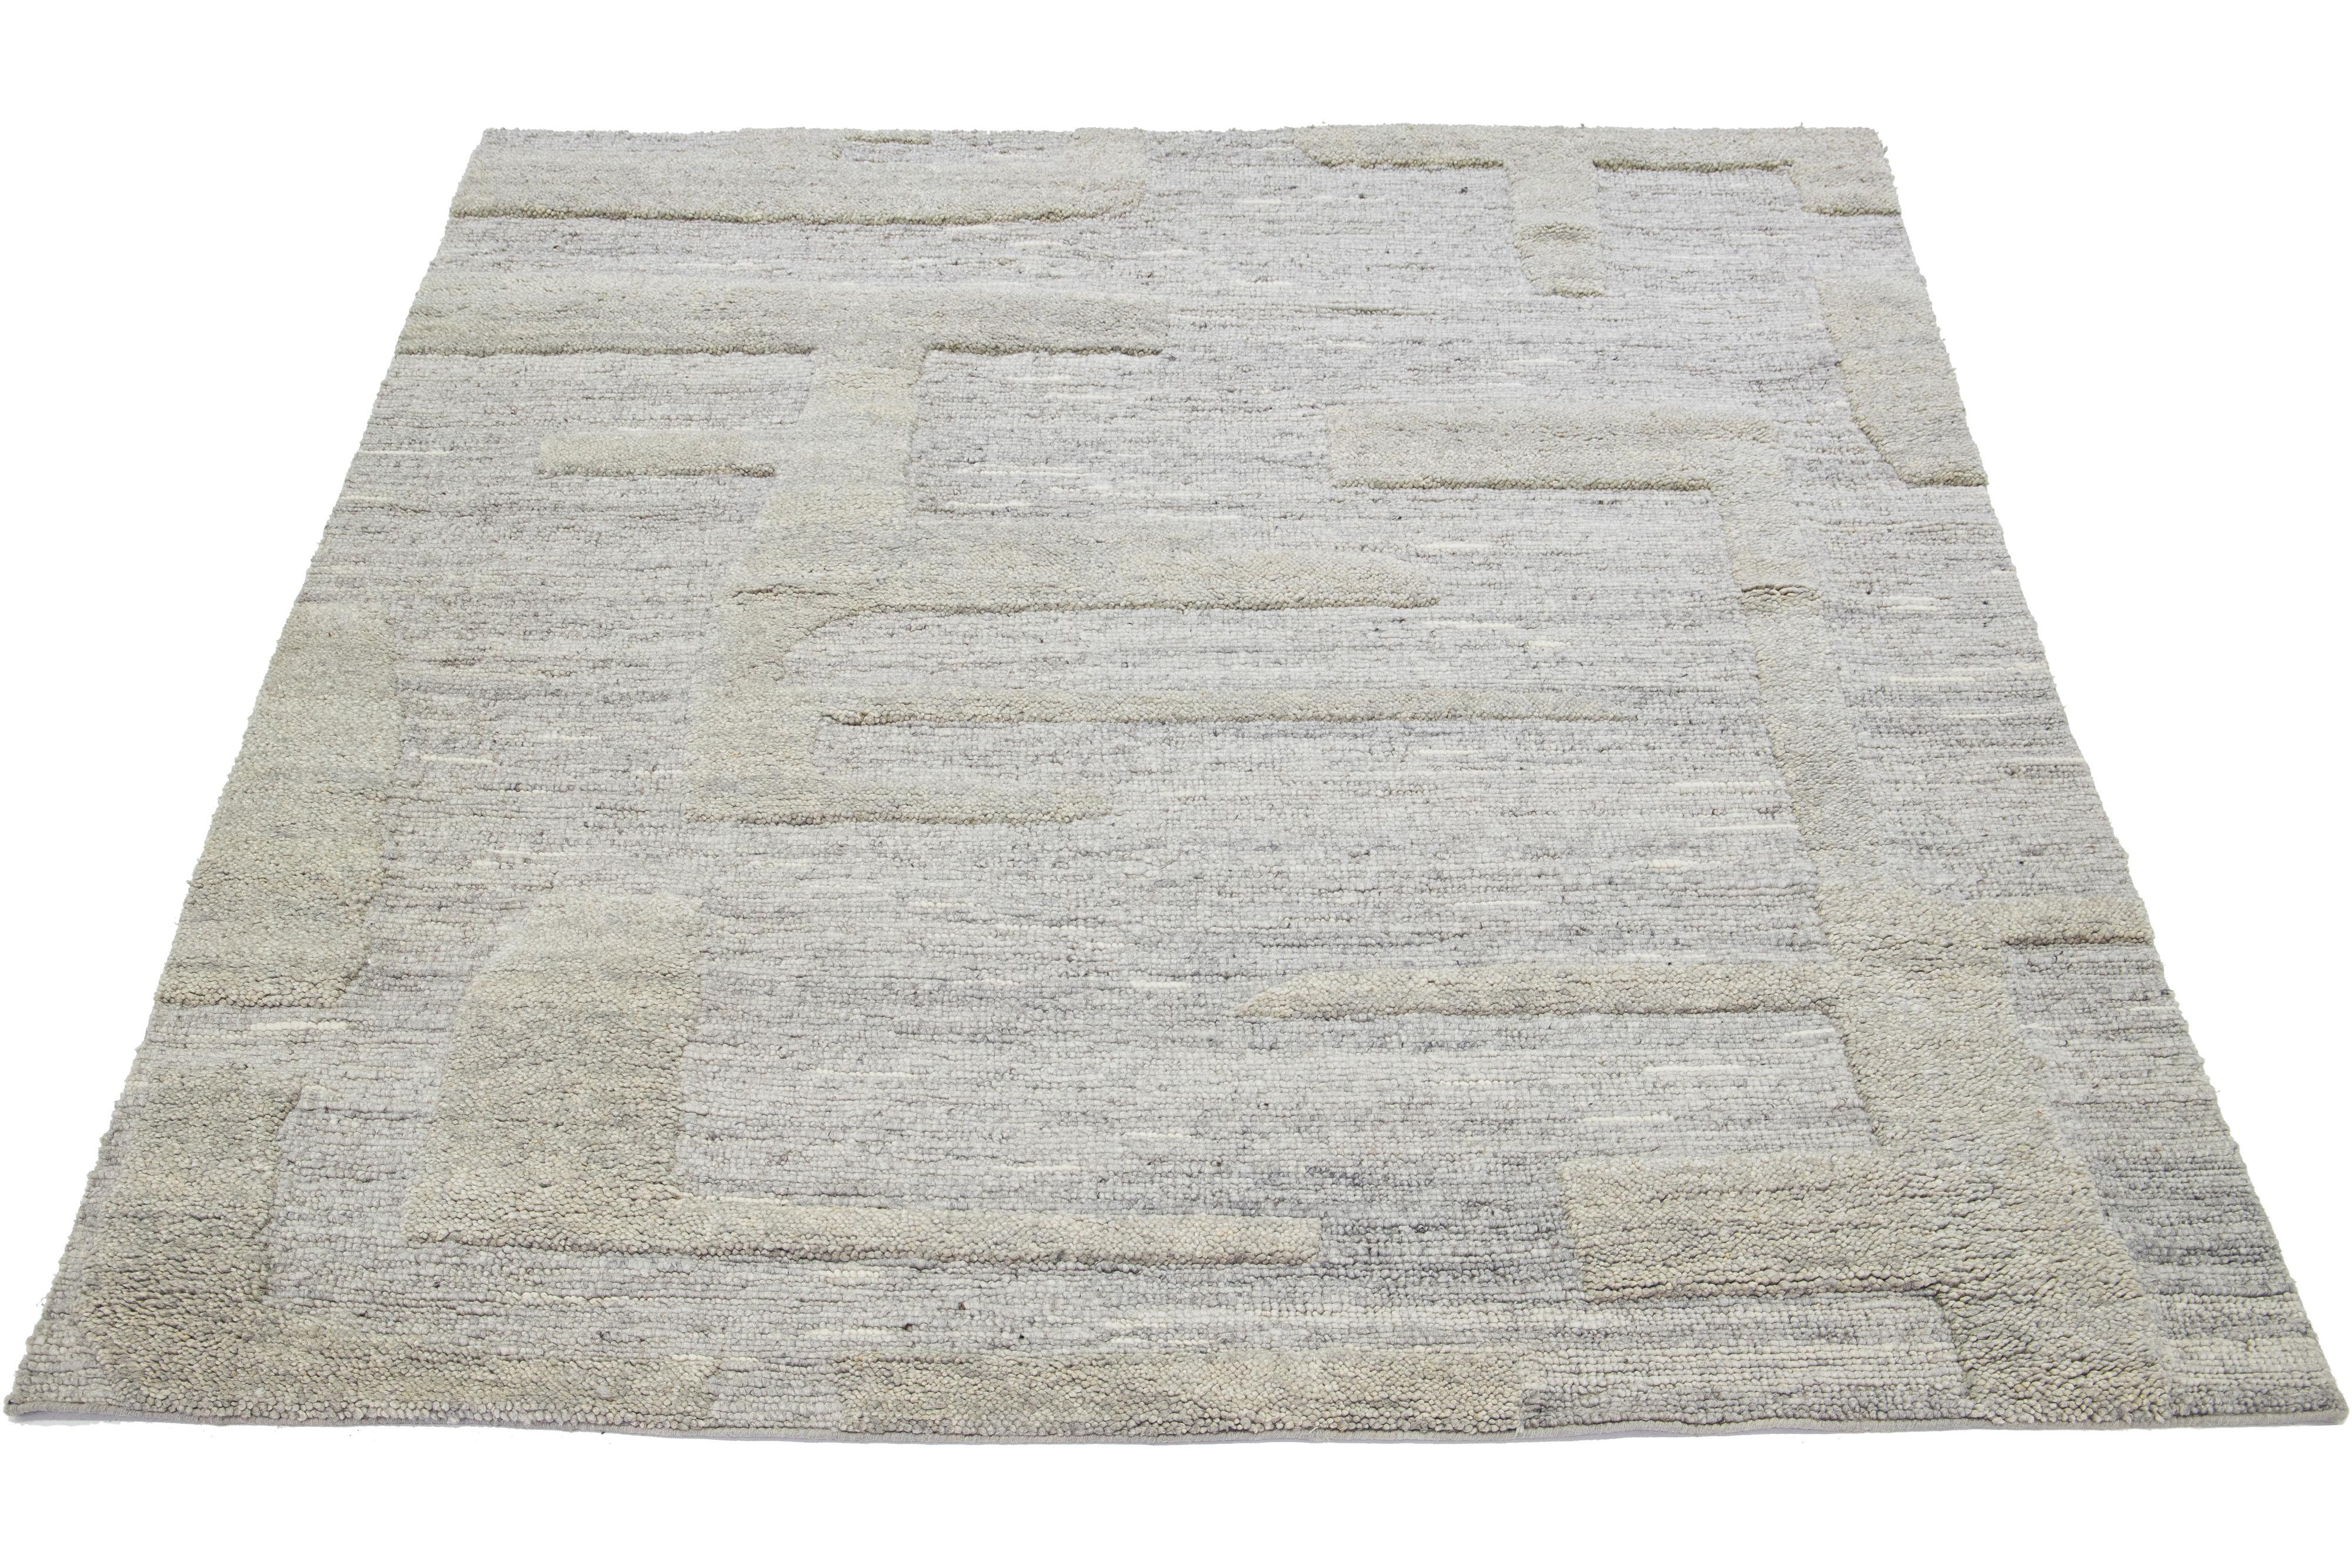 This hand-knotted Moroccan-style wool rug features a beautiful modern design with a natural gray background. It showcases a stunning geometric pattern.

This rug measures 8' x 10'.